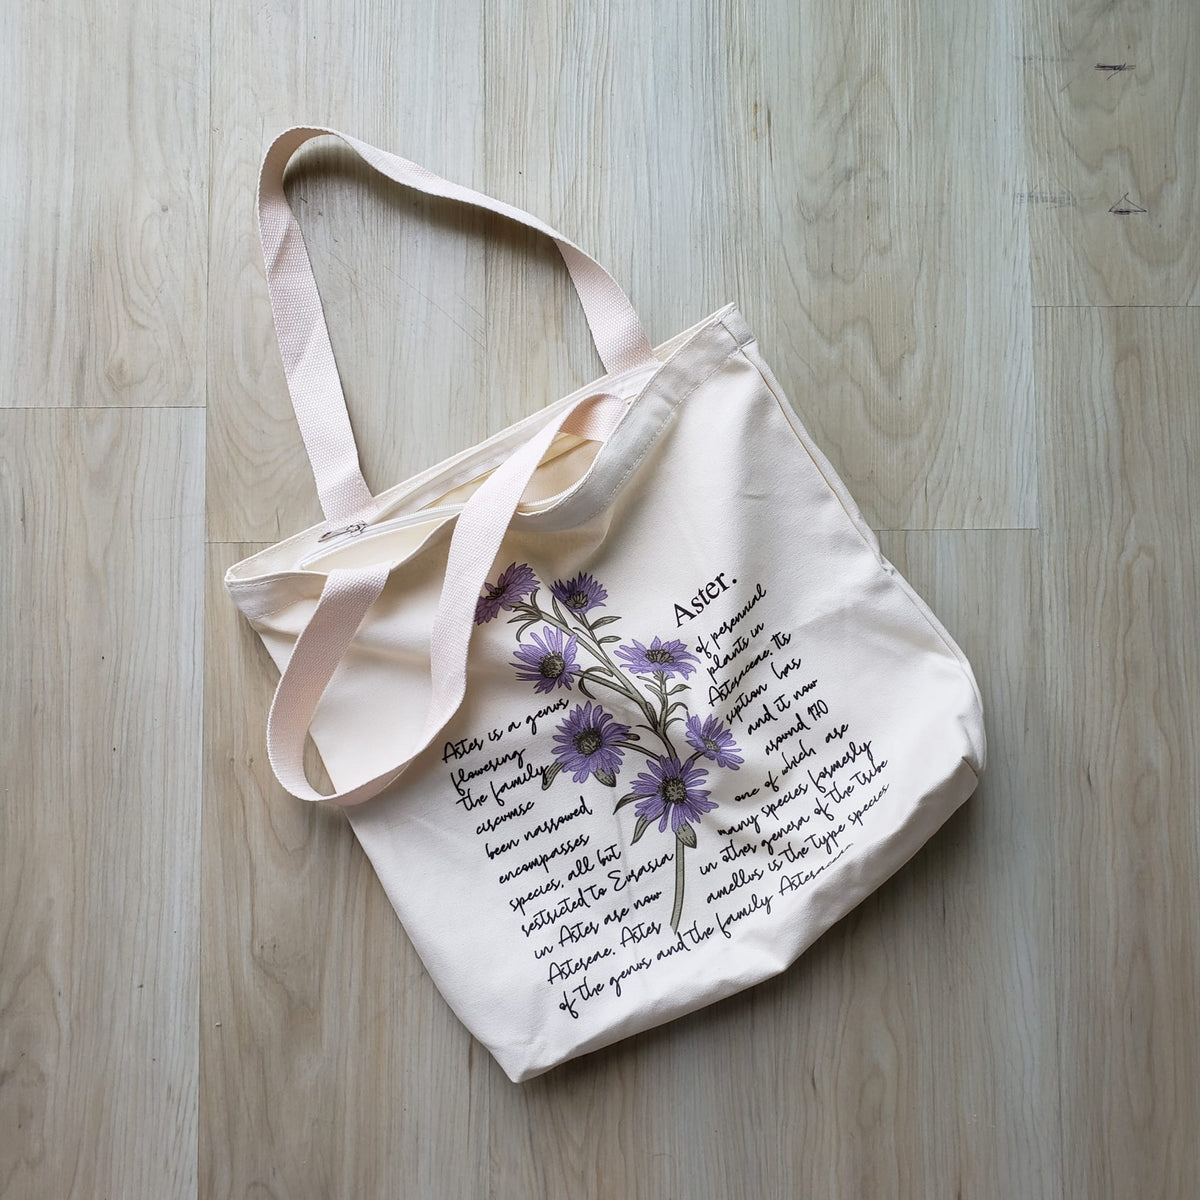 Personalized Name Purple Floral Cotton Canvas Tote Bag – The